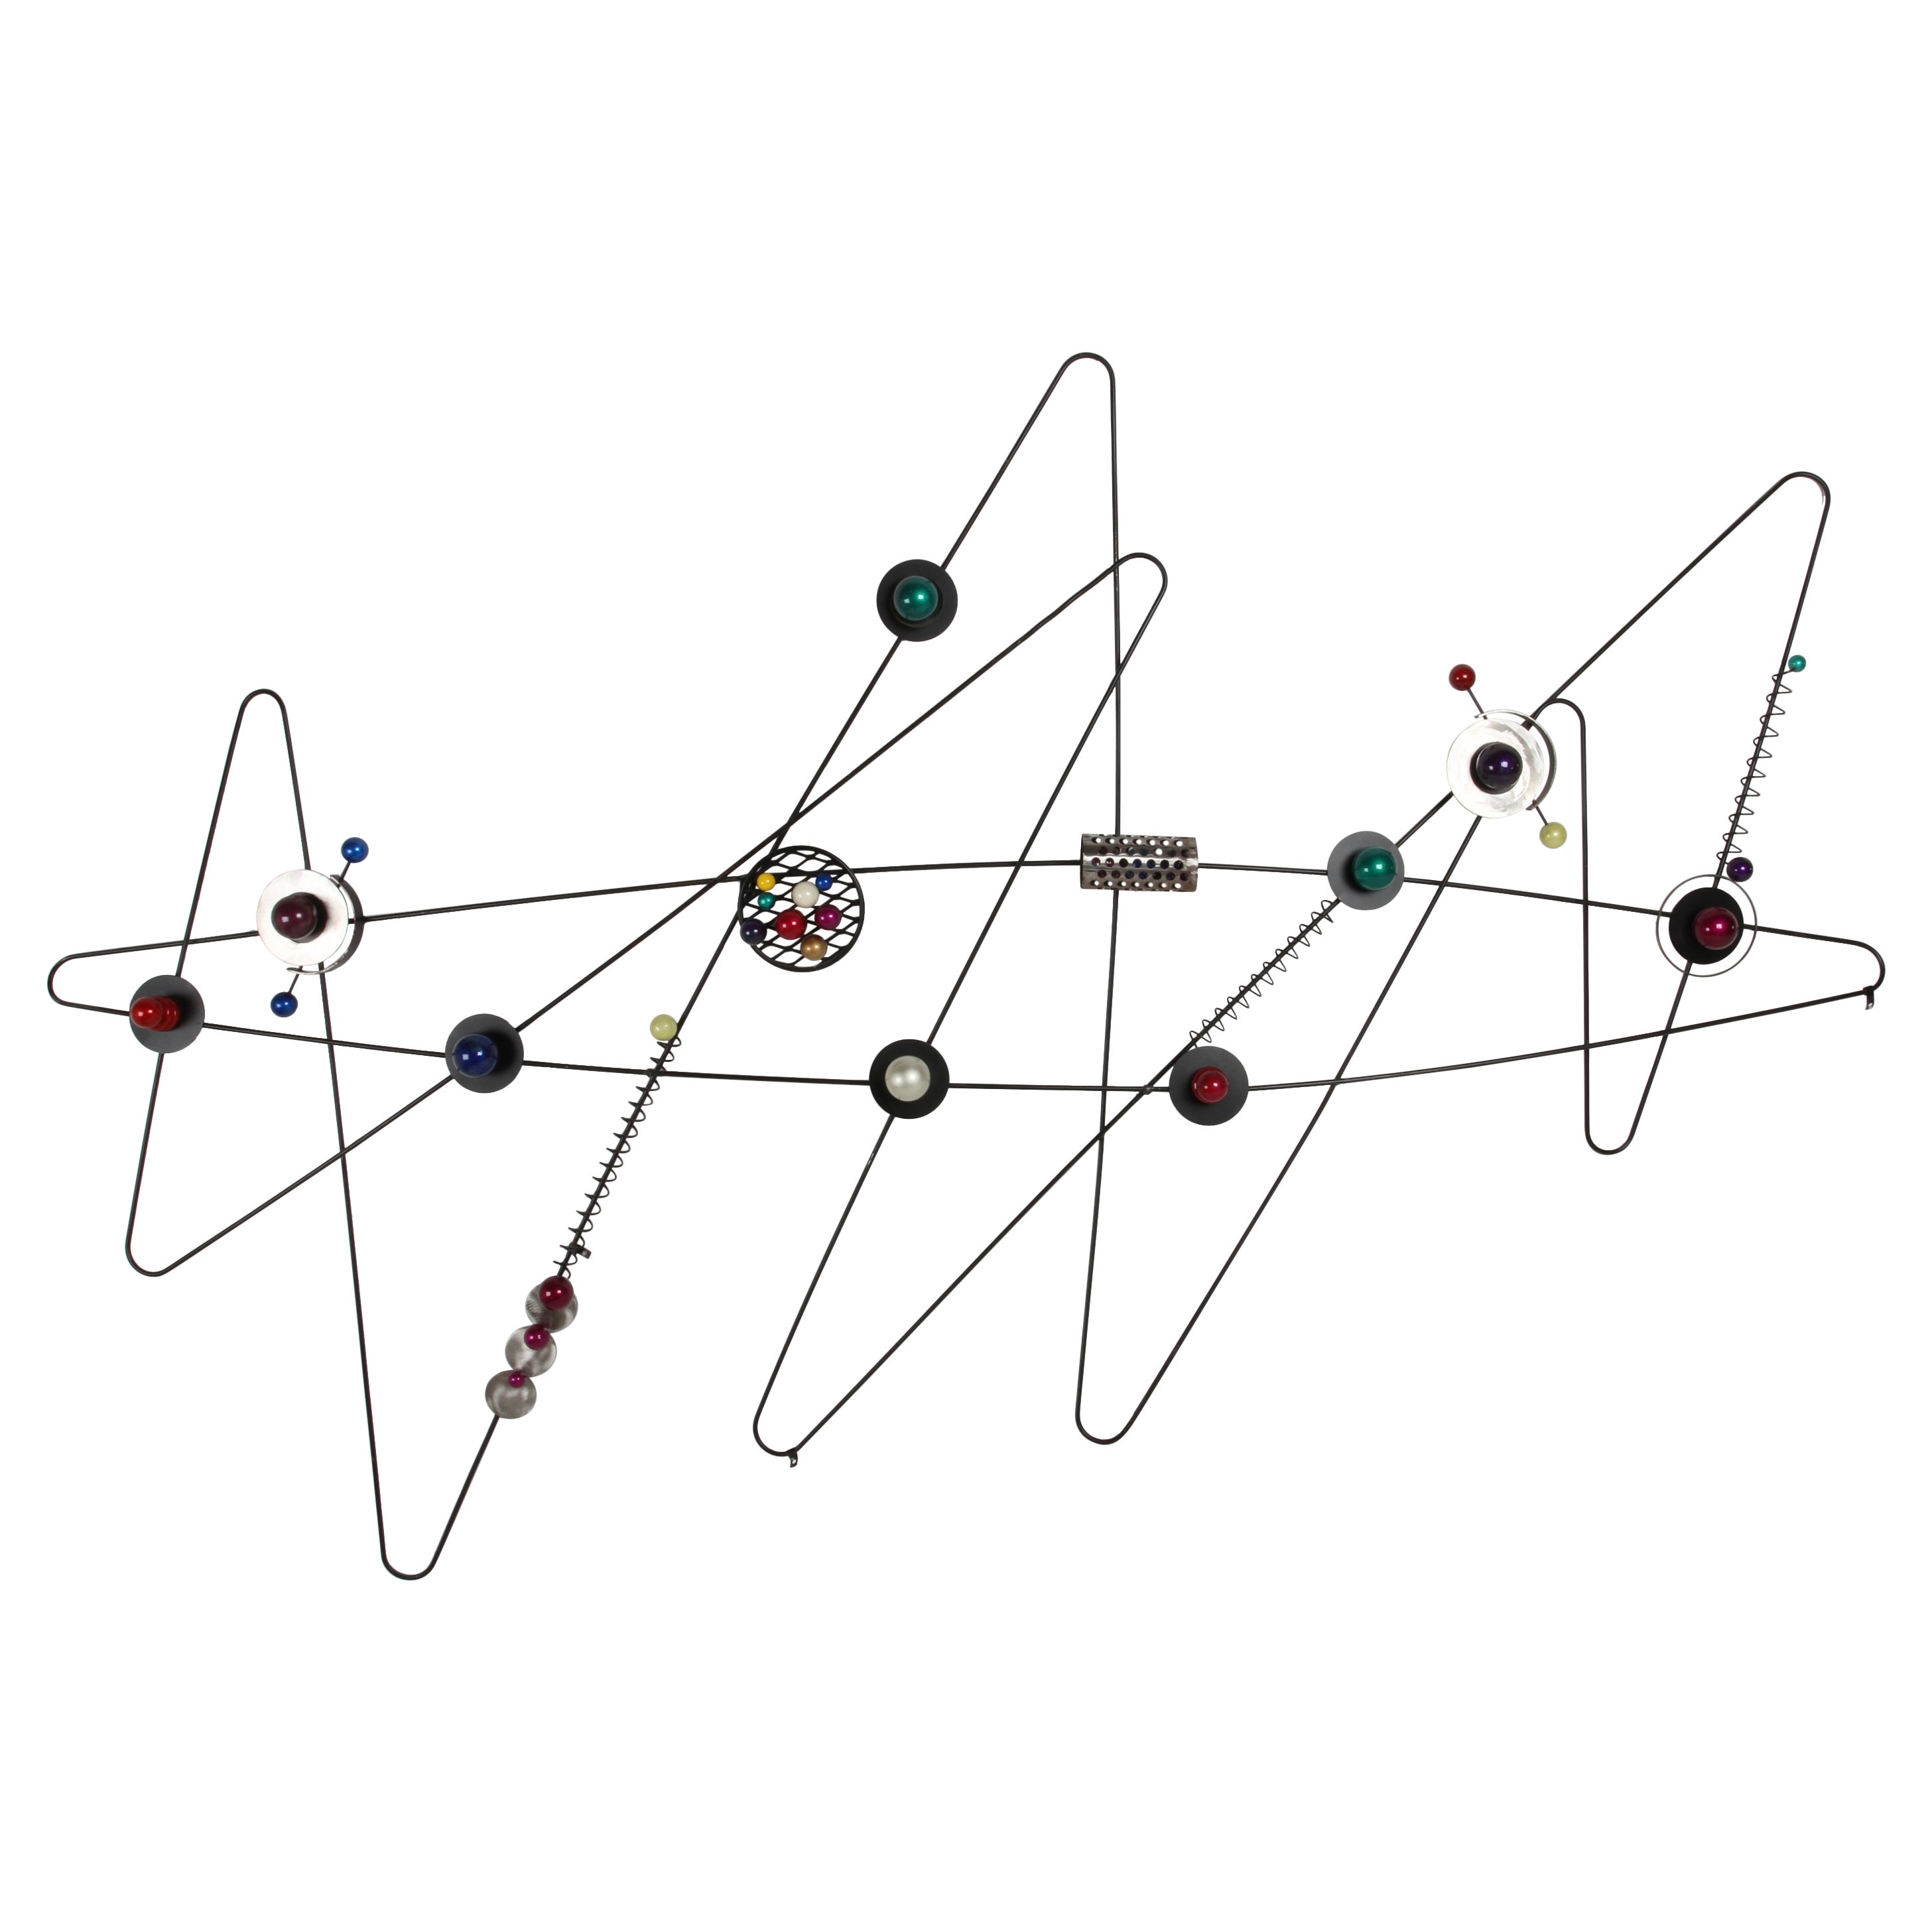 Large 8'+ Atomic Age Mid-Century Modern Style Unique Space Atom Wall Sculpture  For Sale